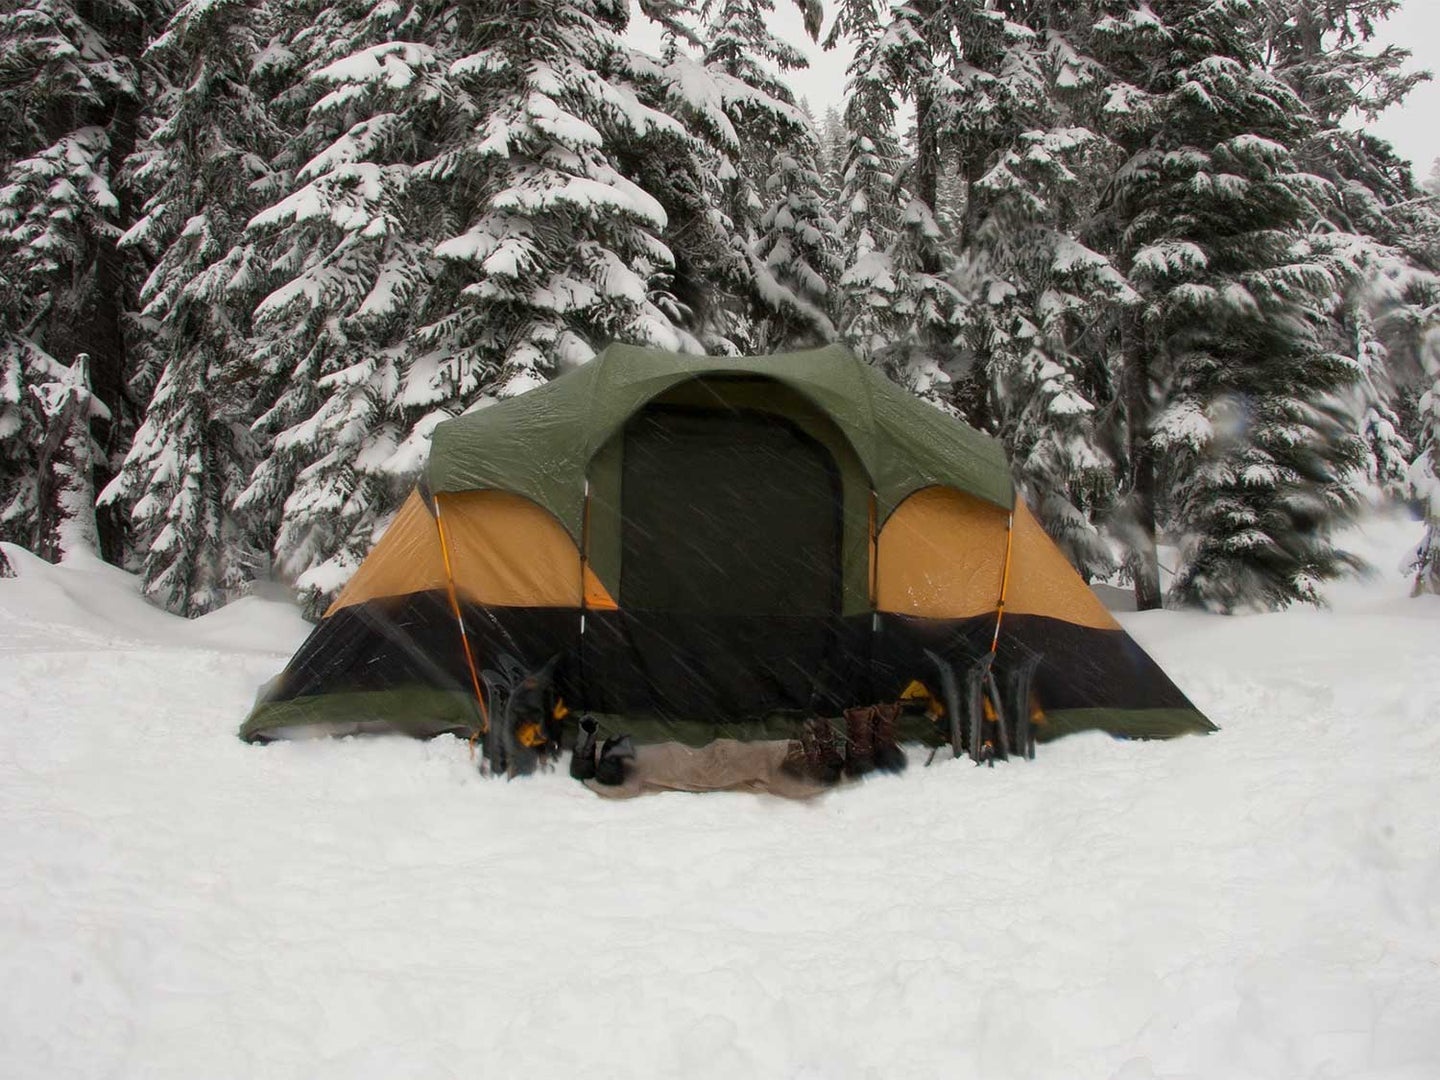 One of the best winter camping tips is to pack the best gear.